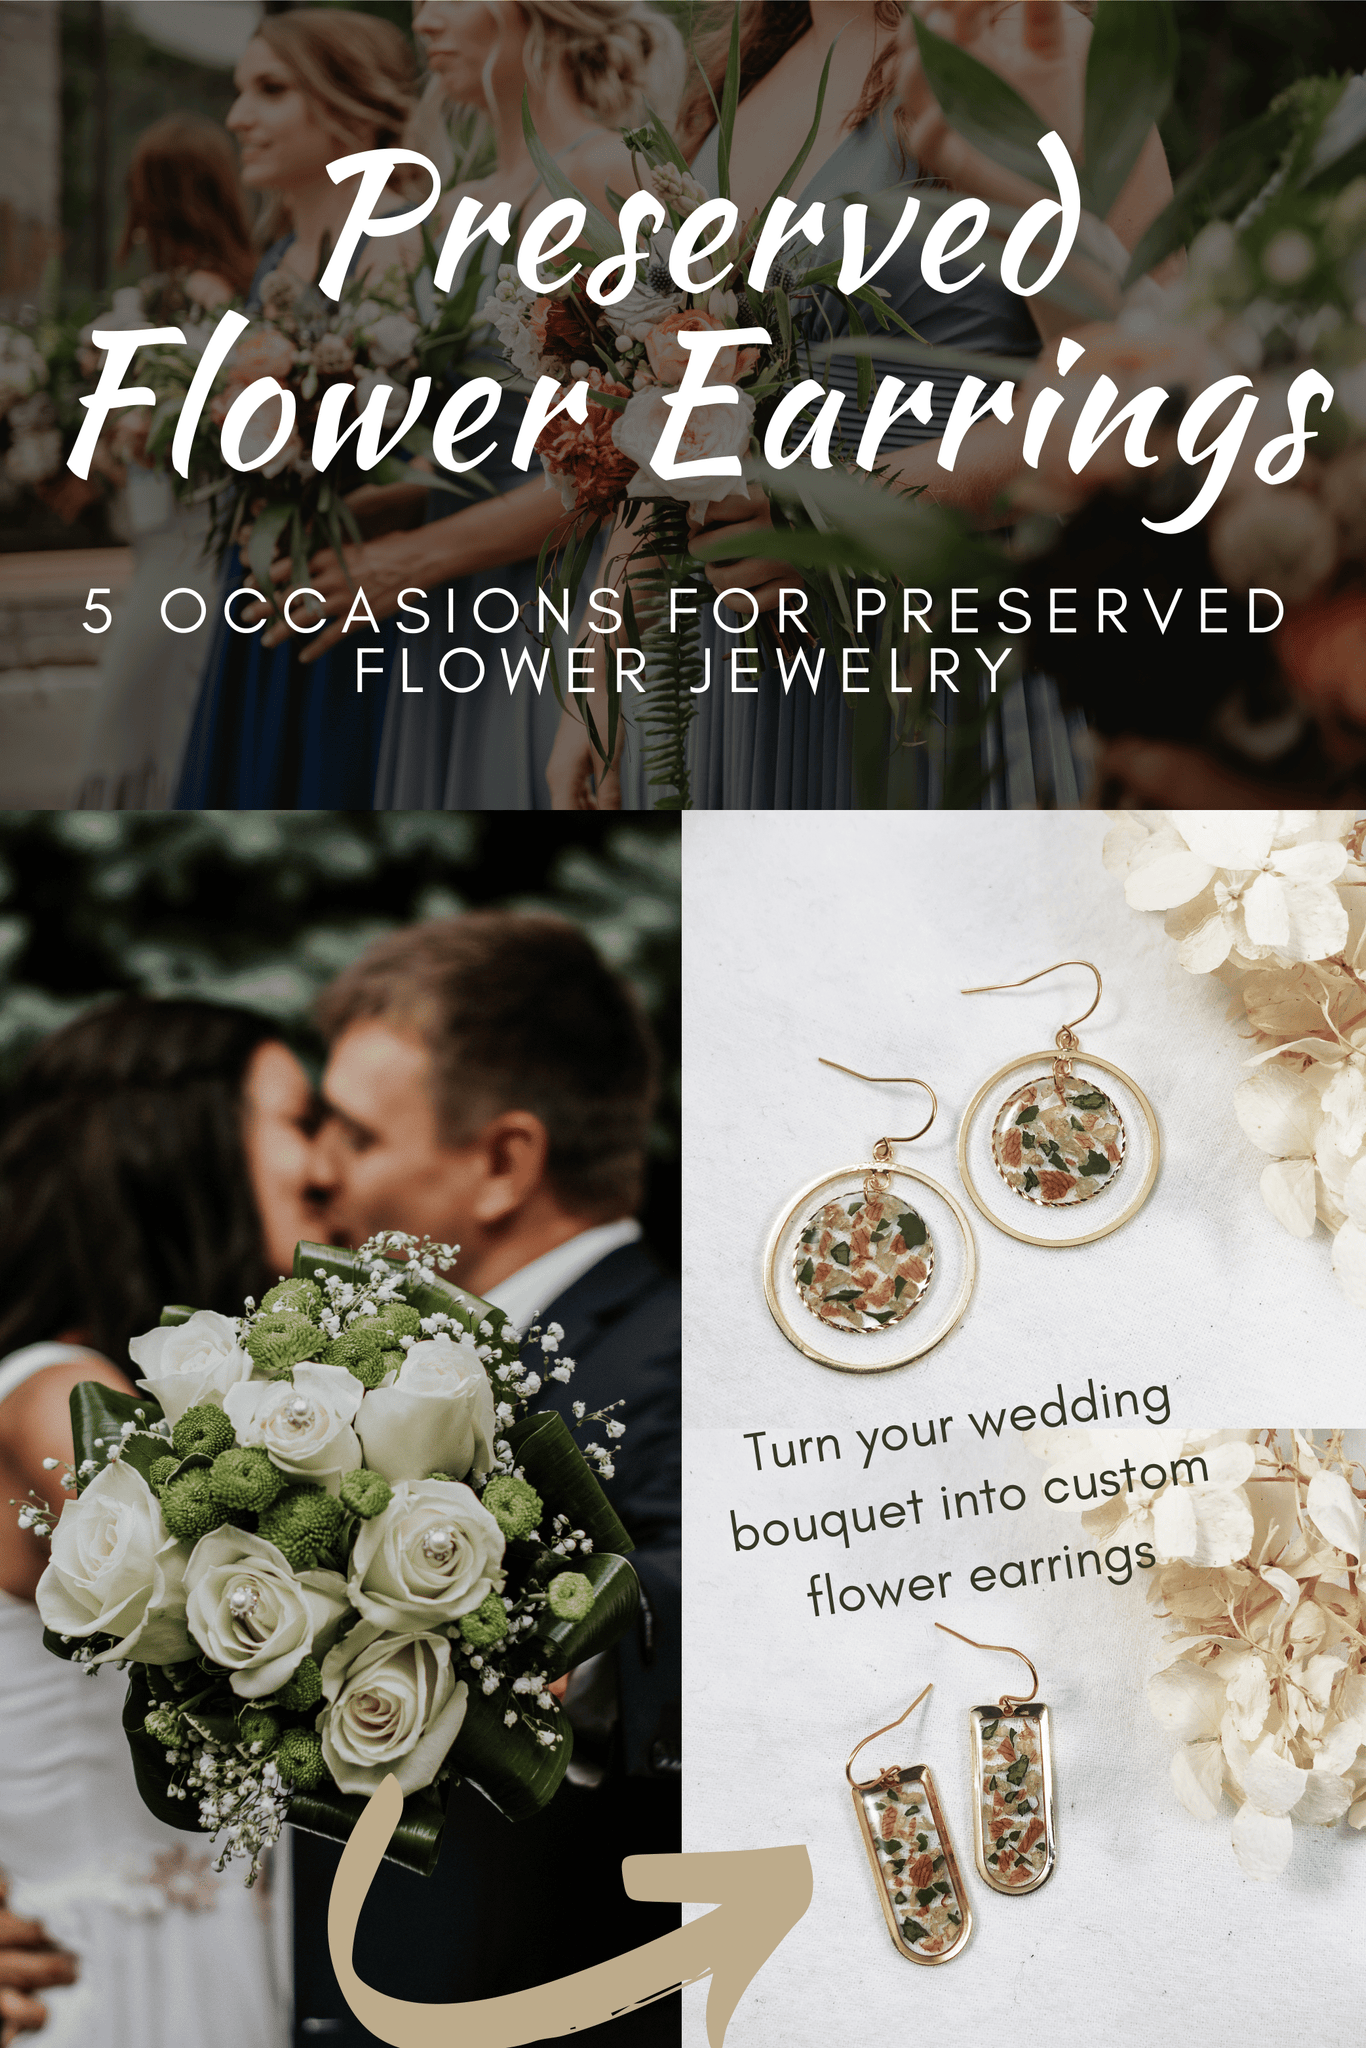 Keep Flowers from These 5 Occasions